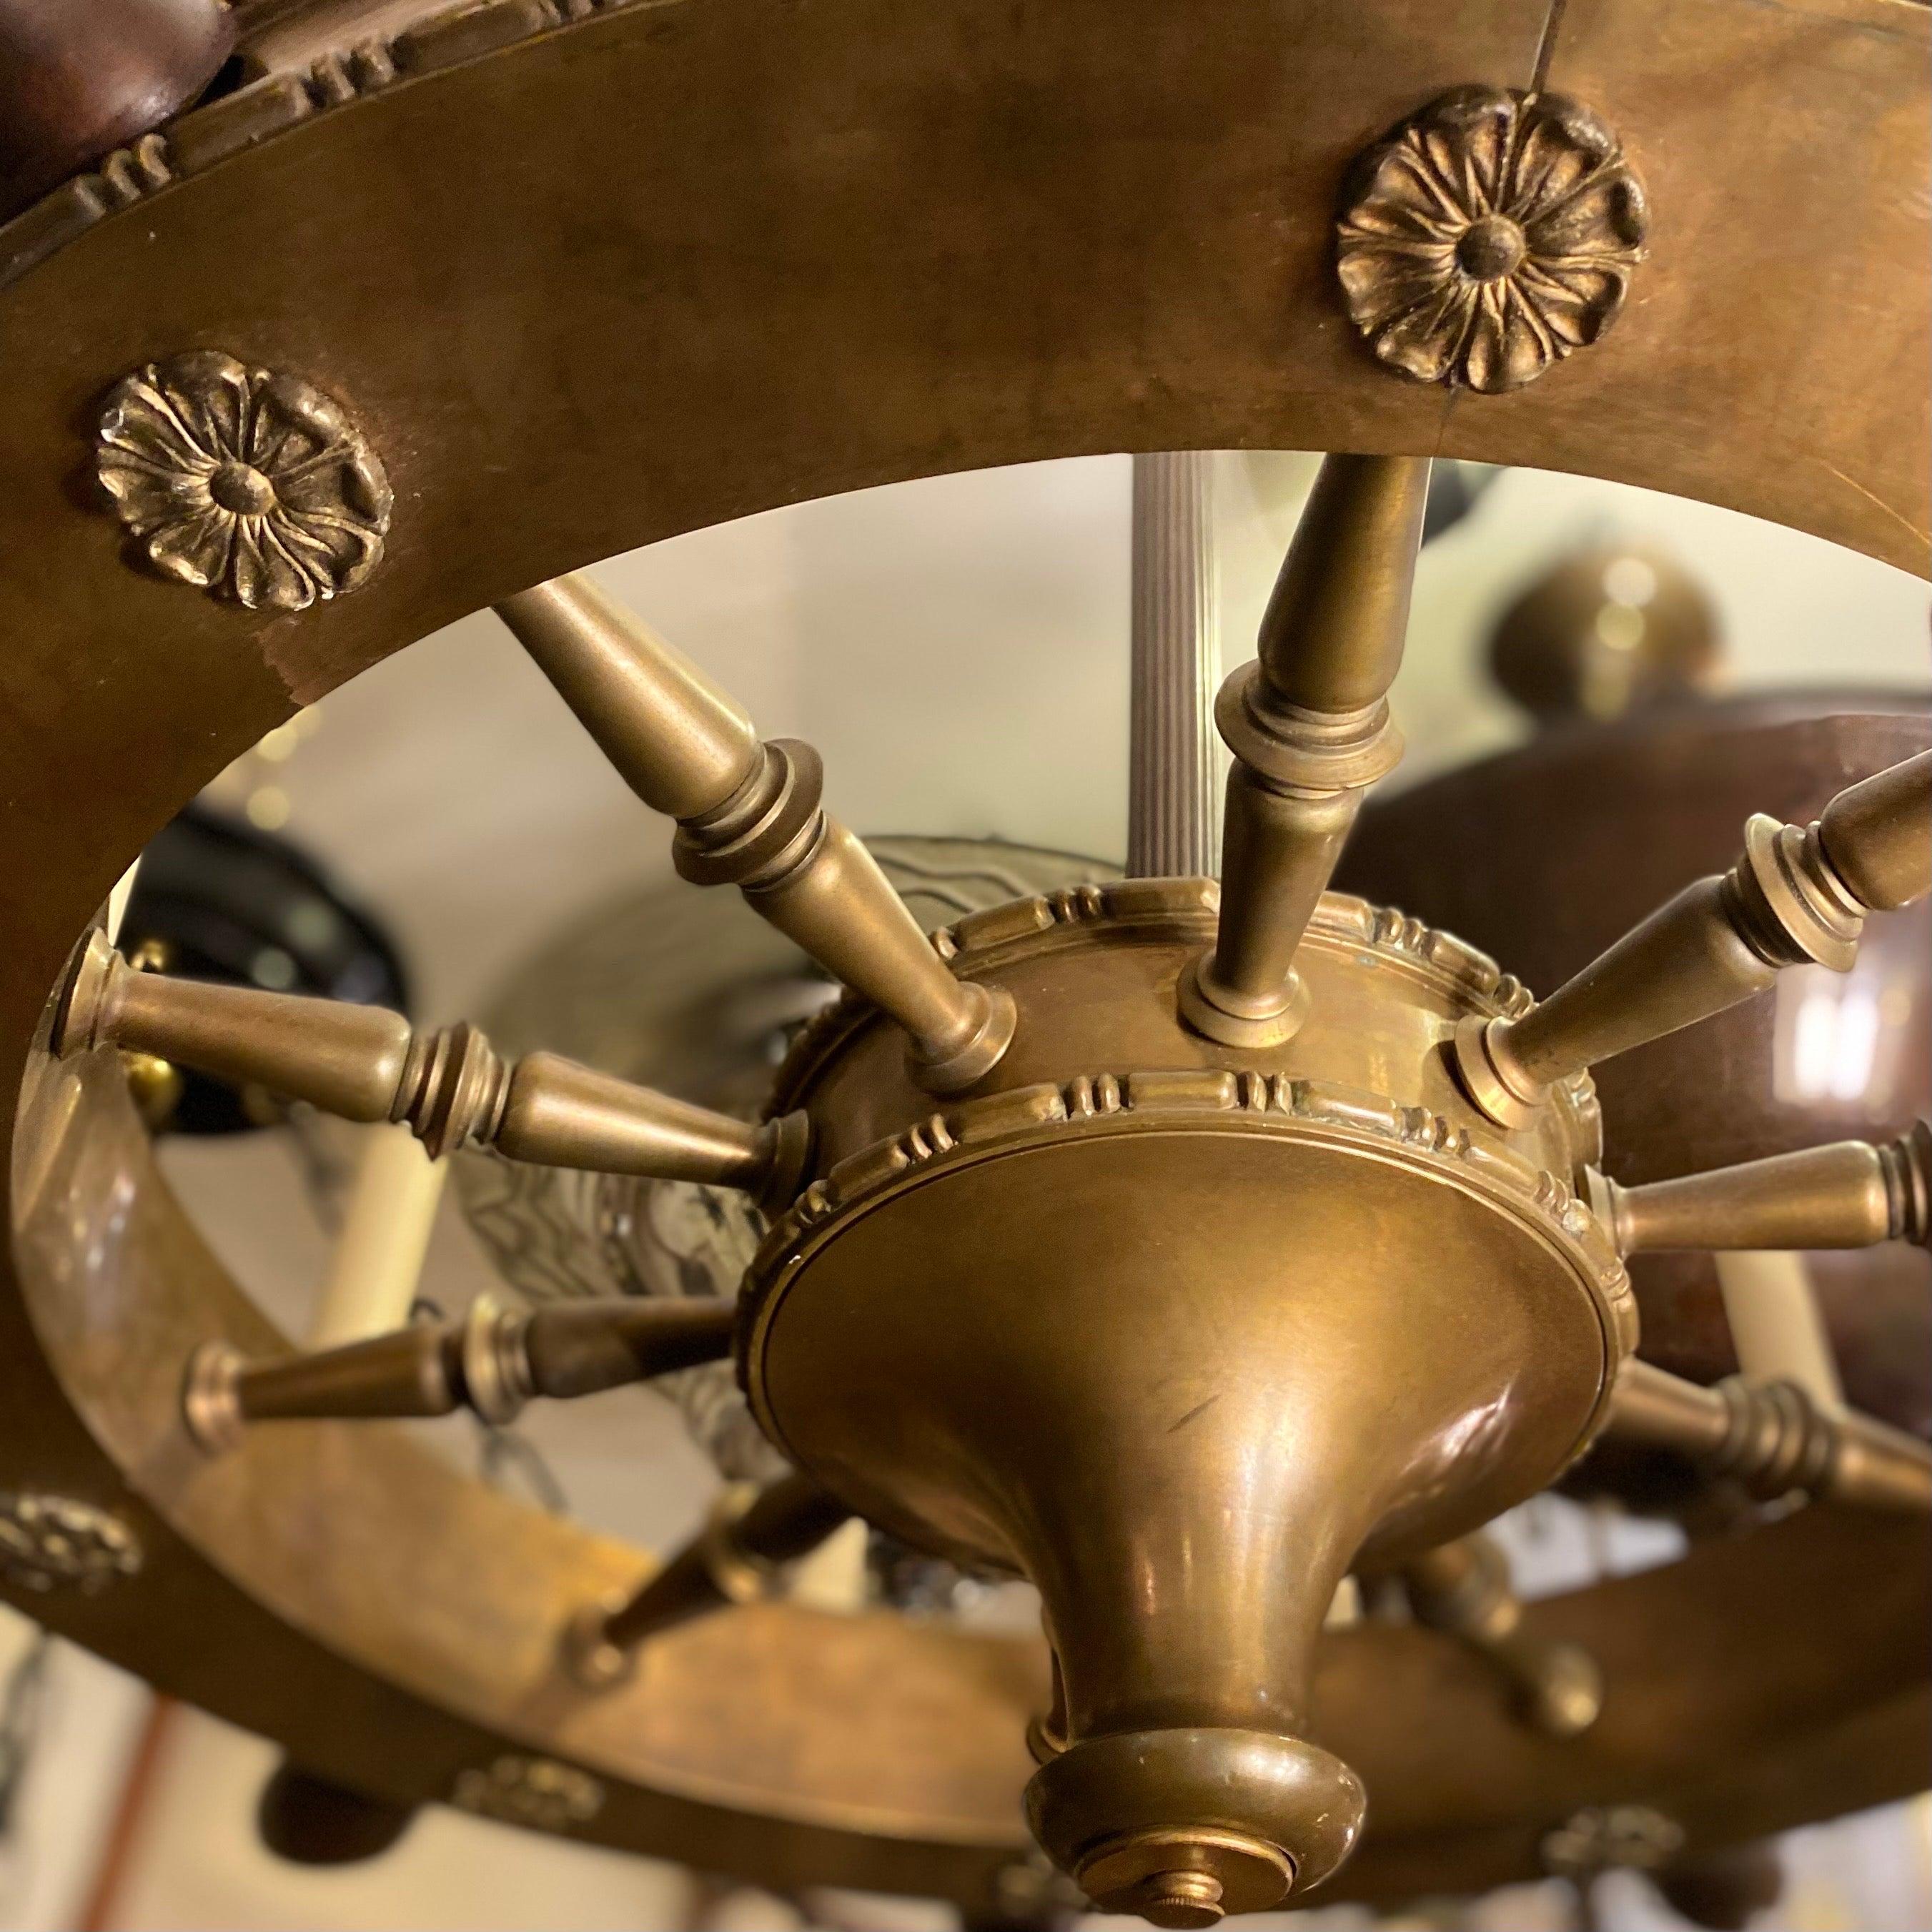 A circa 1940s English cast bronze and wood ship's wheel chandelier with 10 lights.

Measurements:
Diameter 30